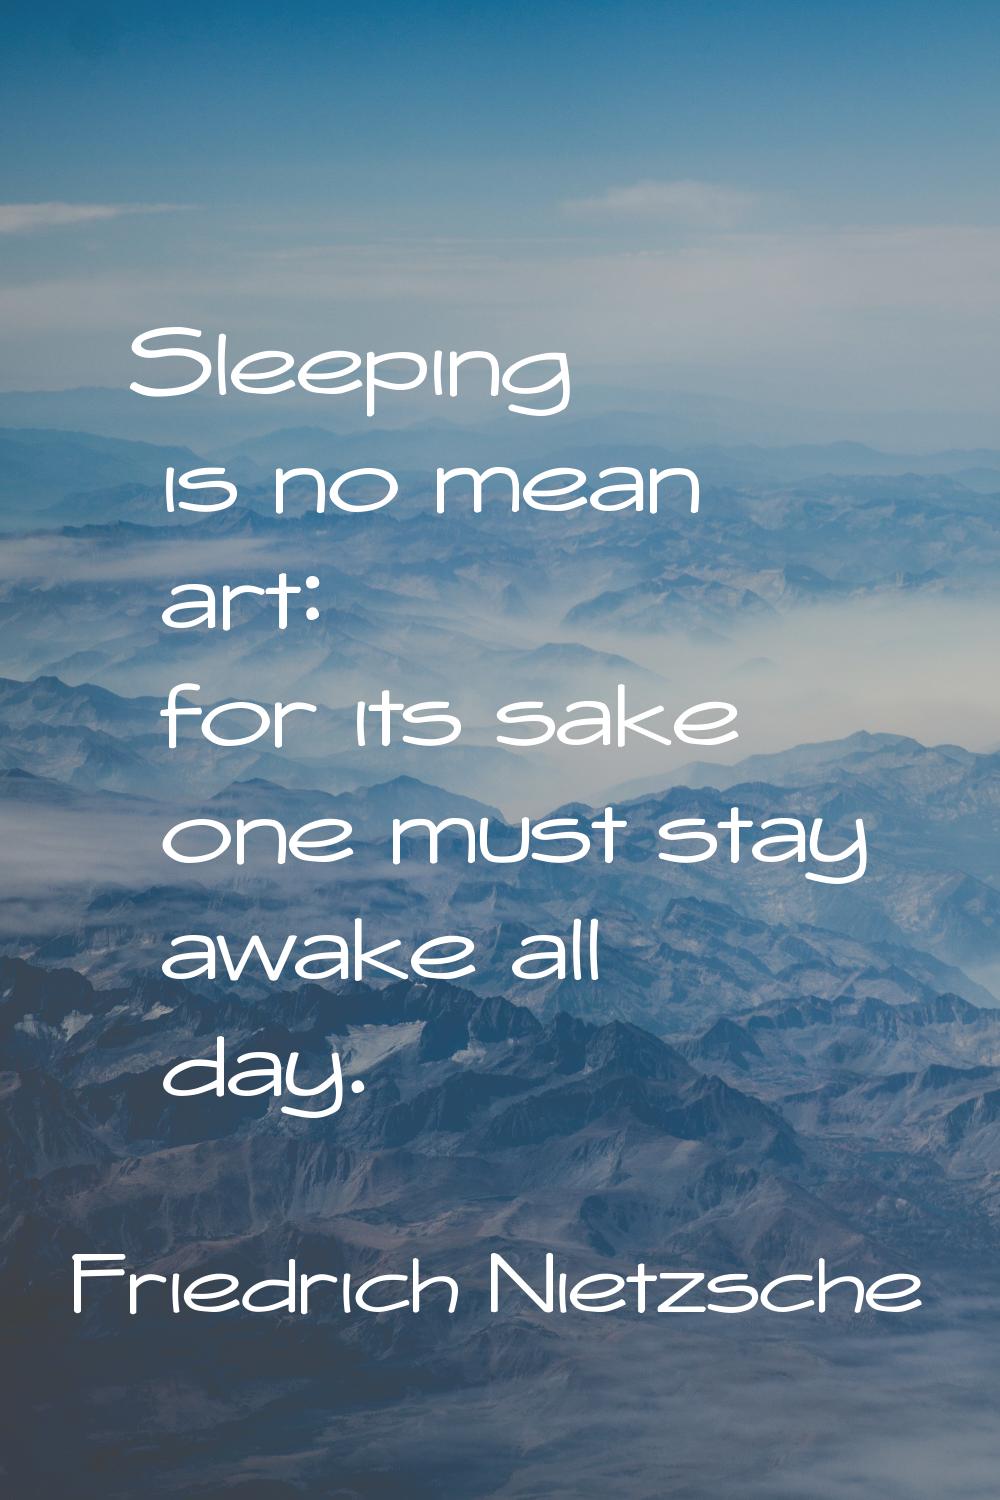 Sleeping is no mean art: for its sake one must stay awake all day.